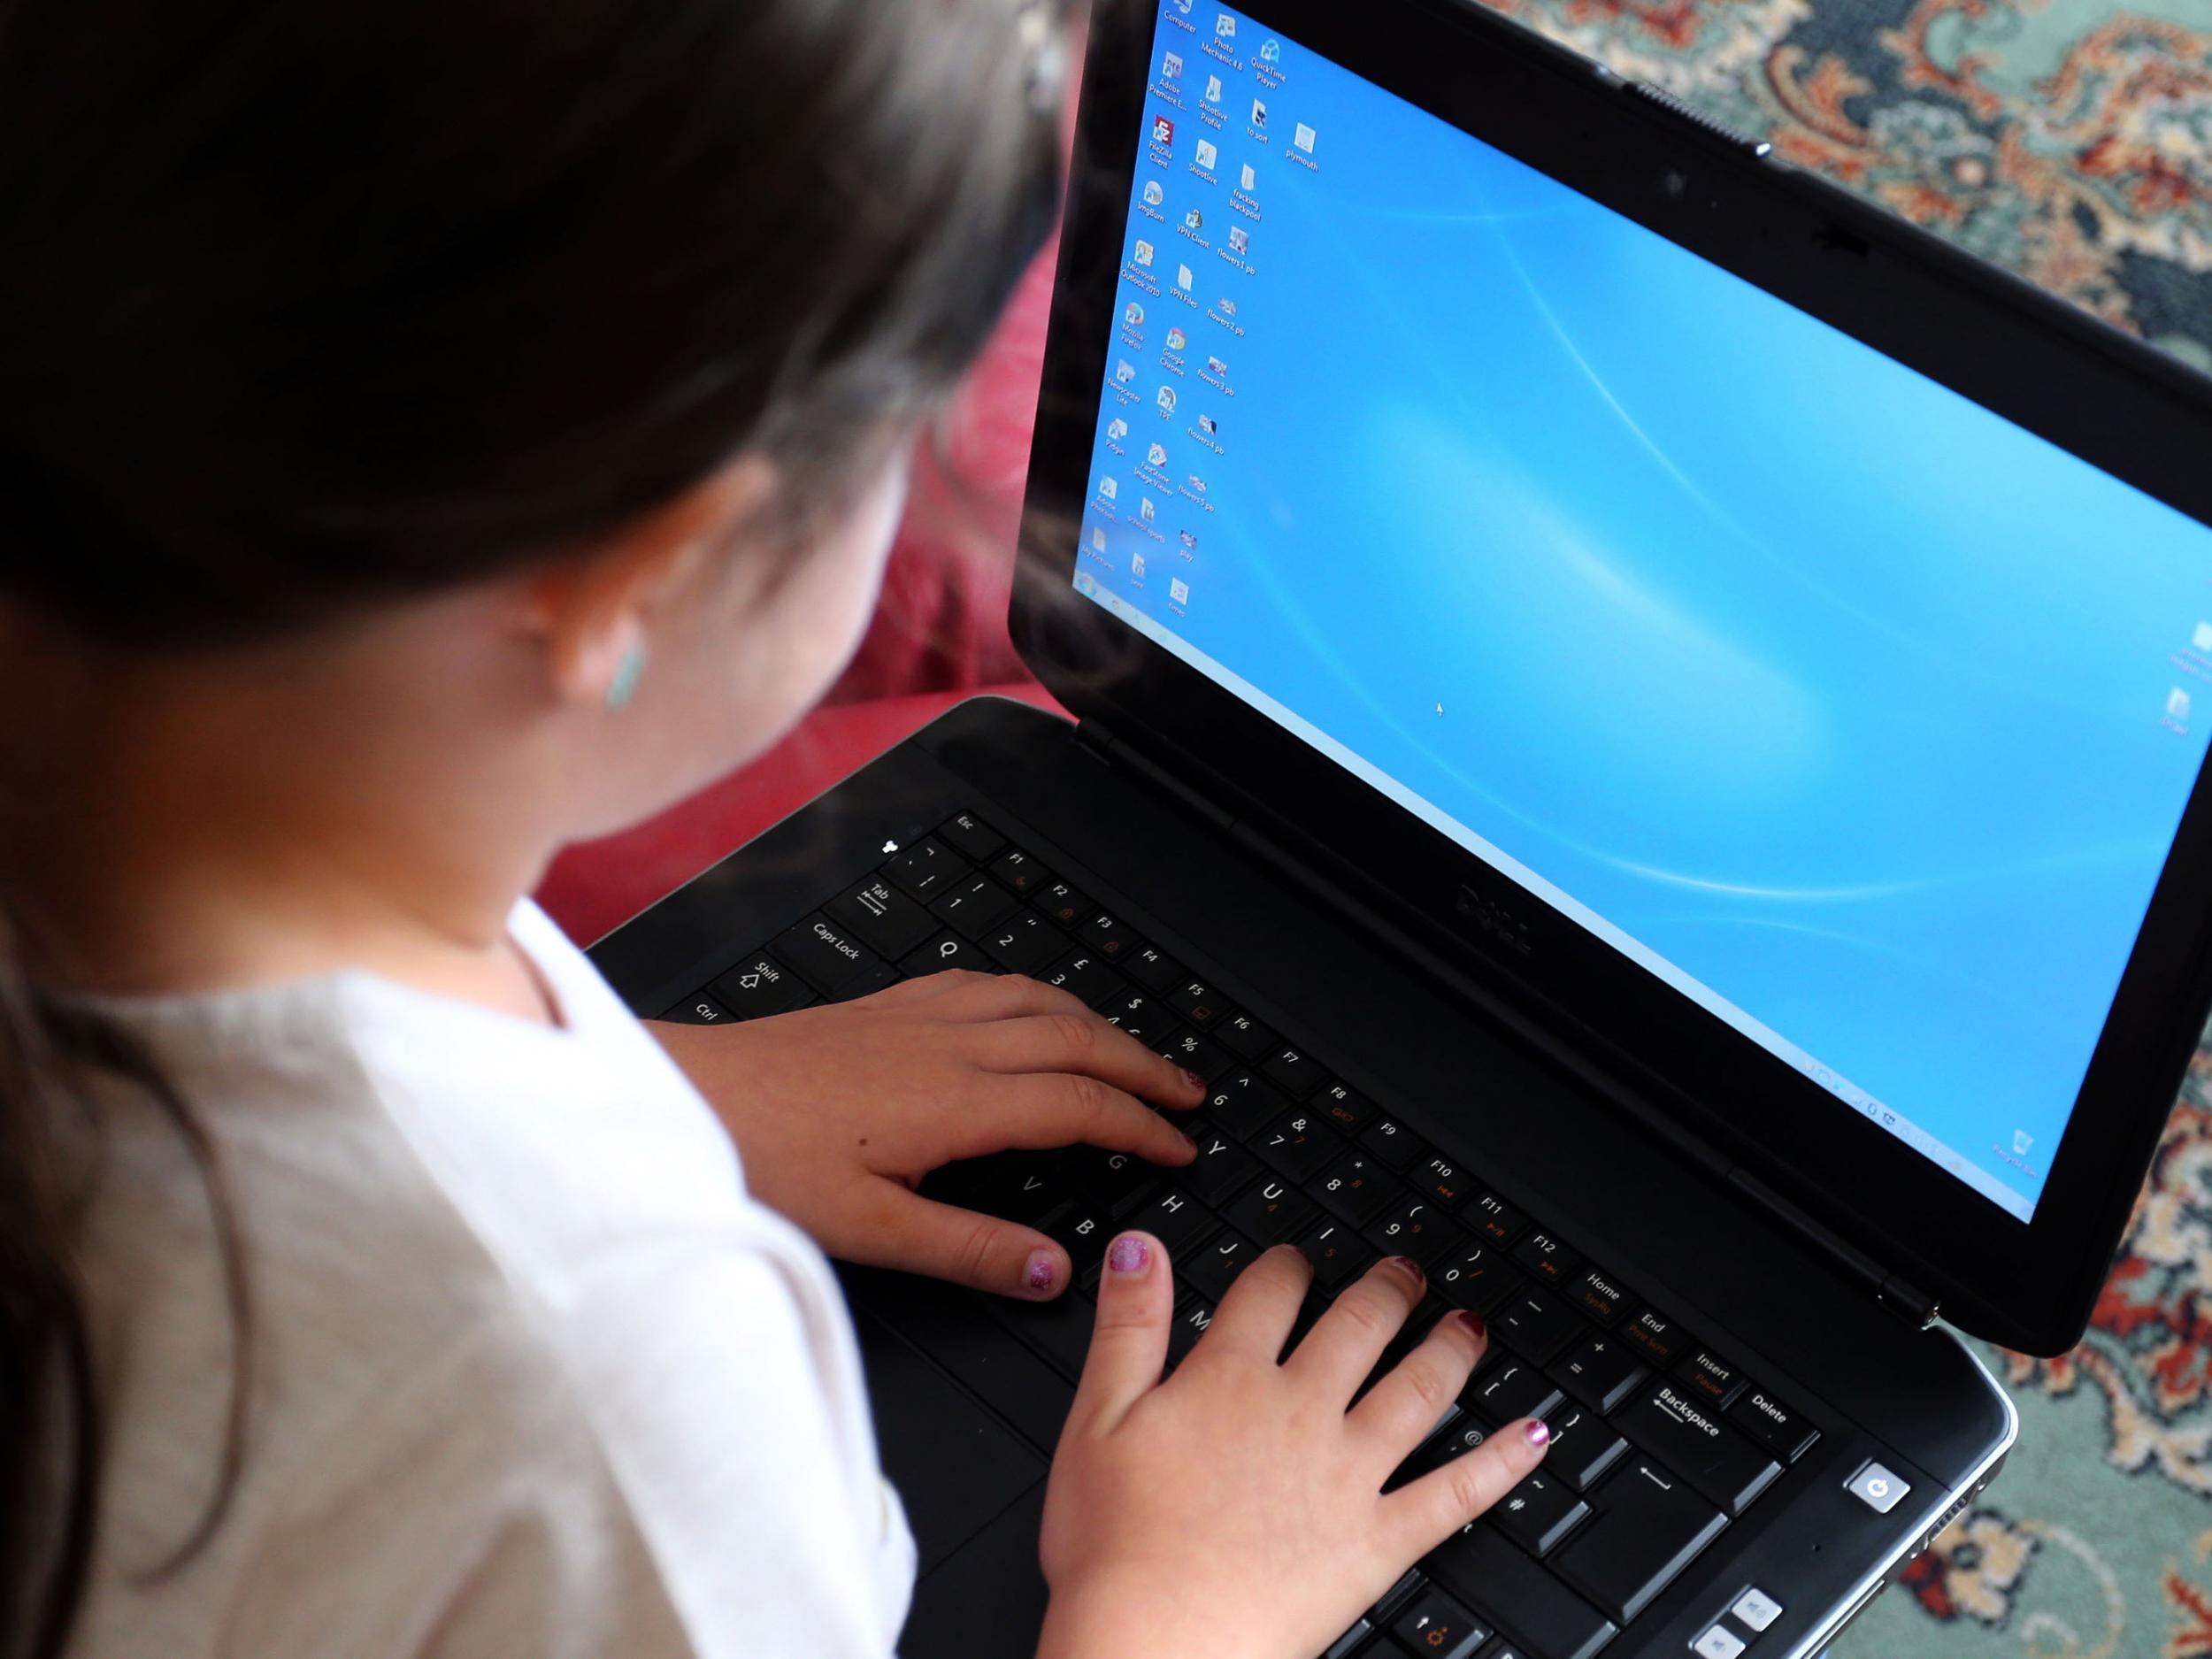 Age verification system could stop children spending a lot of time online